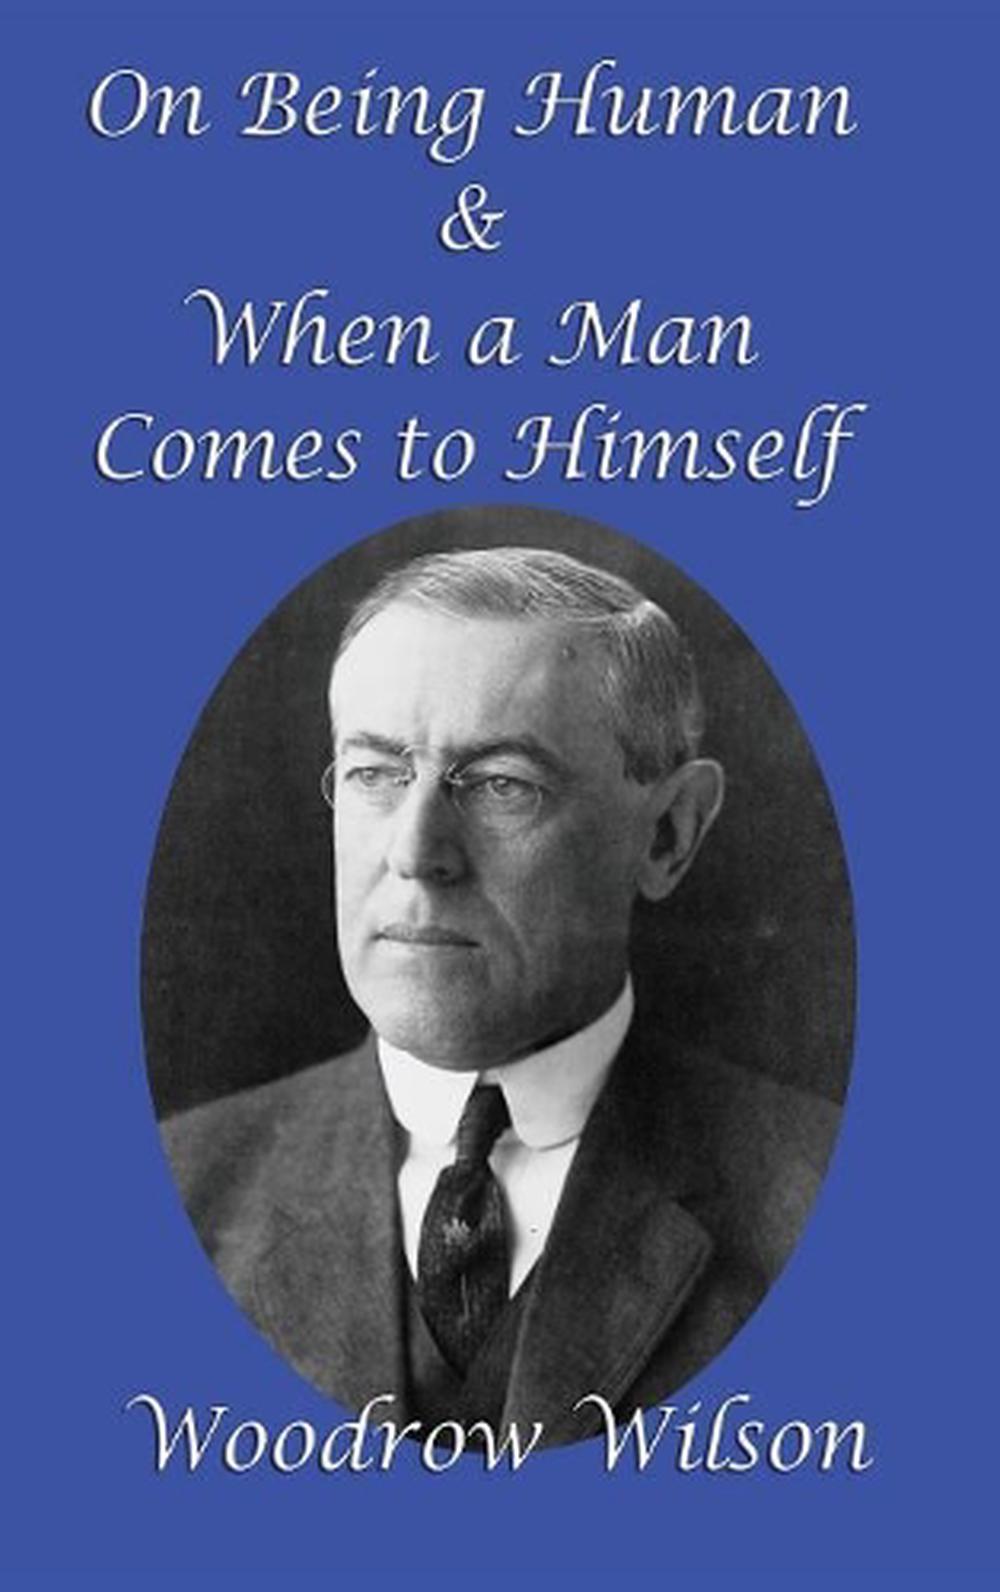 On Being Human and When a Man Comes to Himself by Woodrow Wilson ...